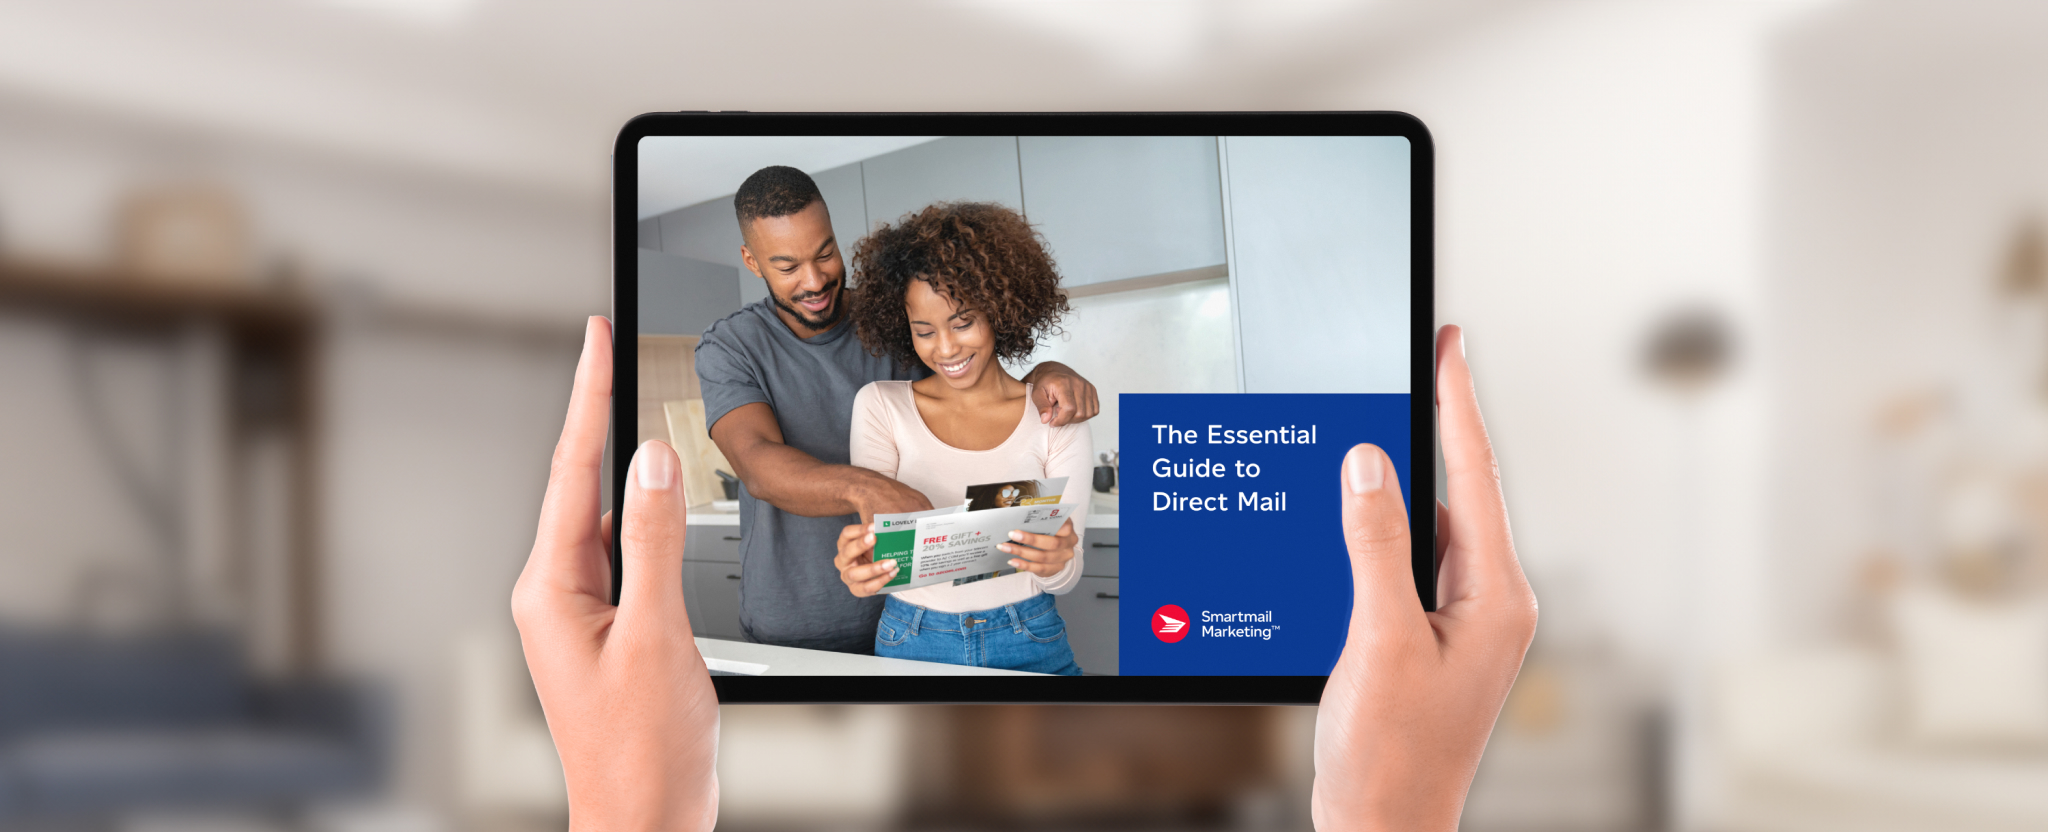 A person holds a tablet computer that displays the cover of the “Essential guide to direct mail” from Smartmail Marketing™